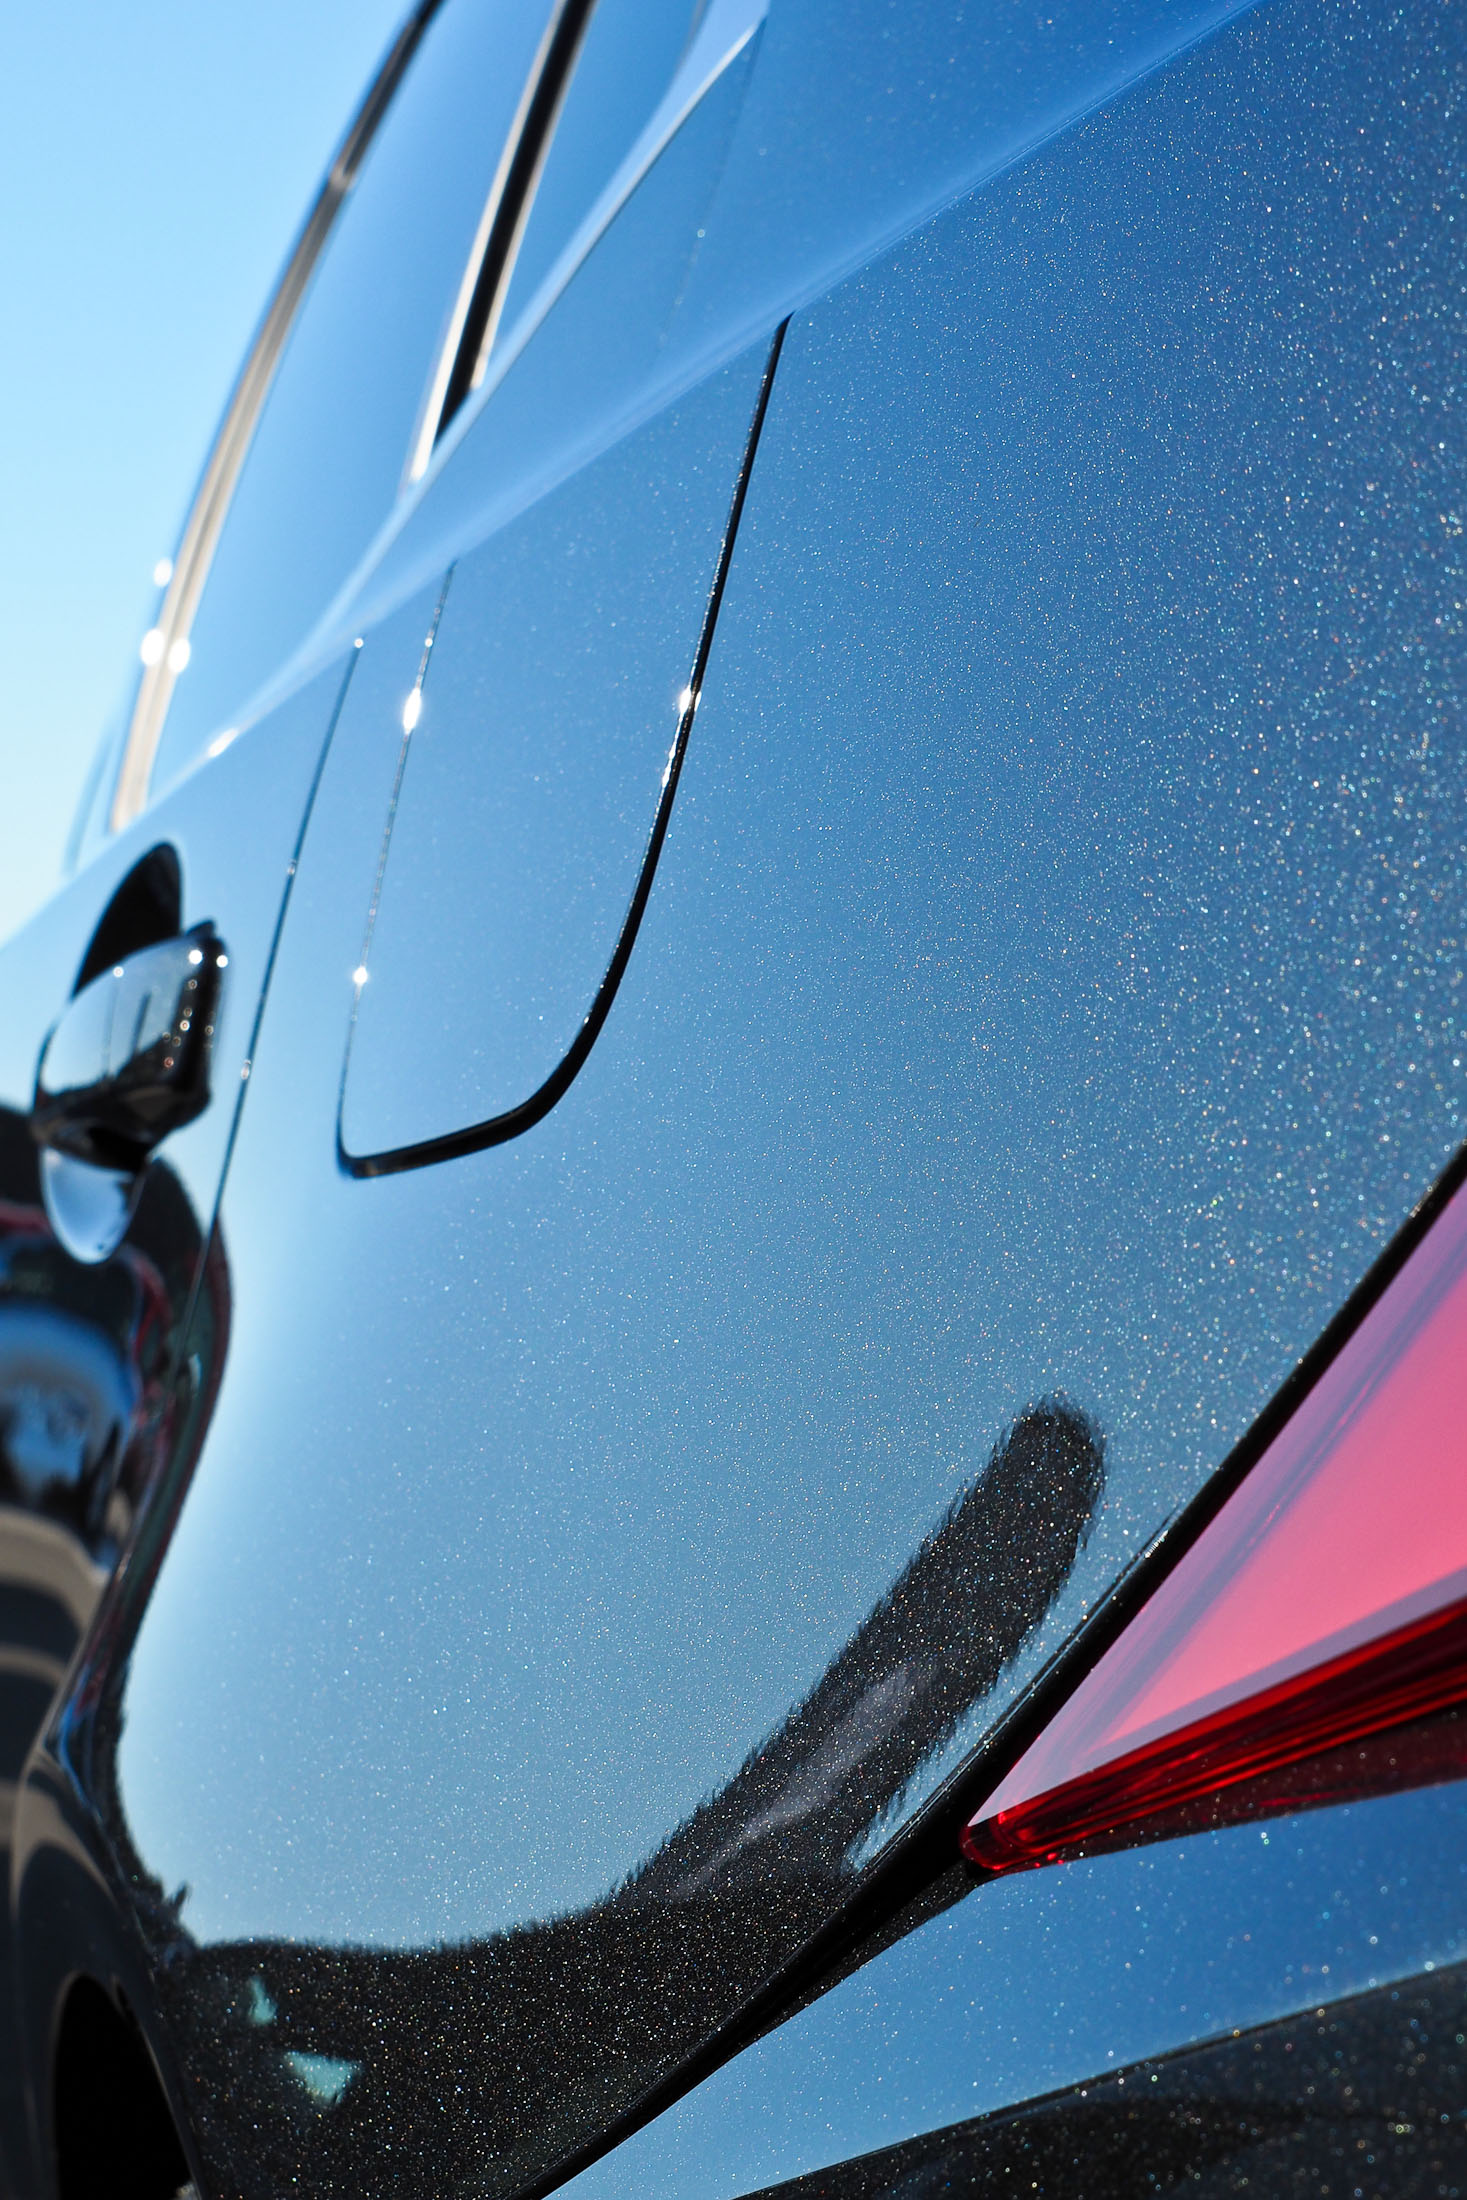 Close up of fleck reflecting in high gloss vehicle coating